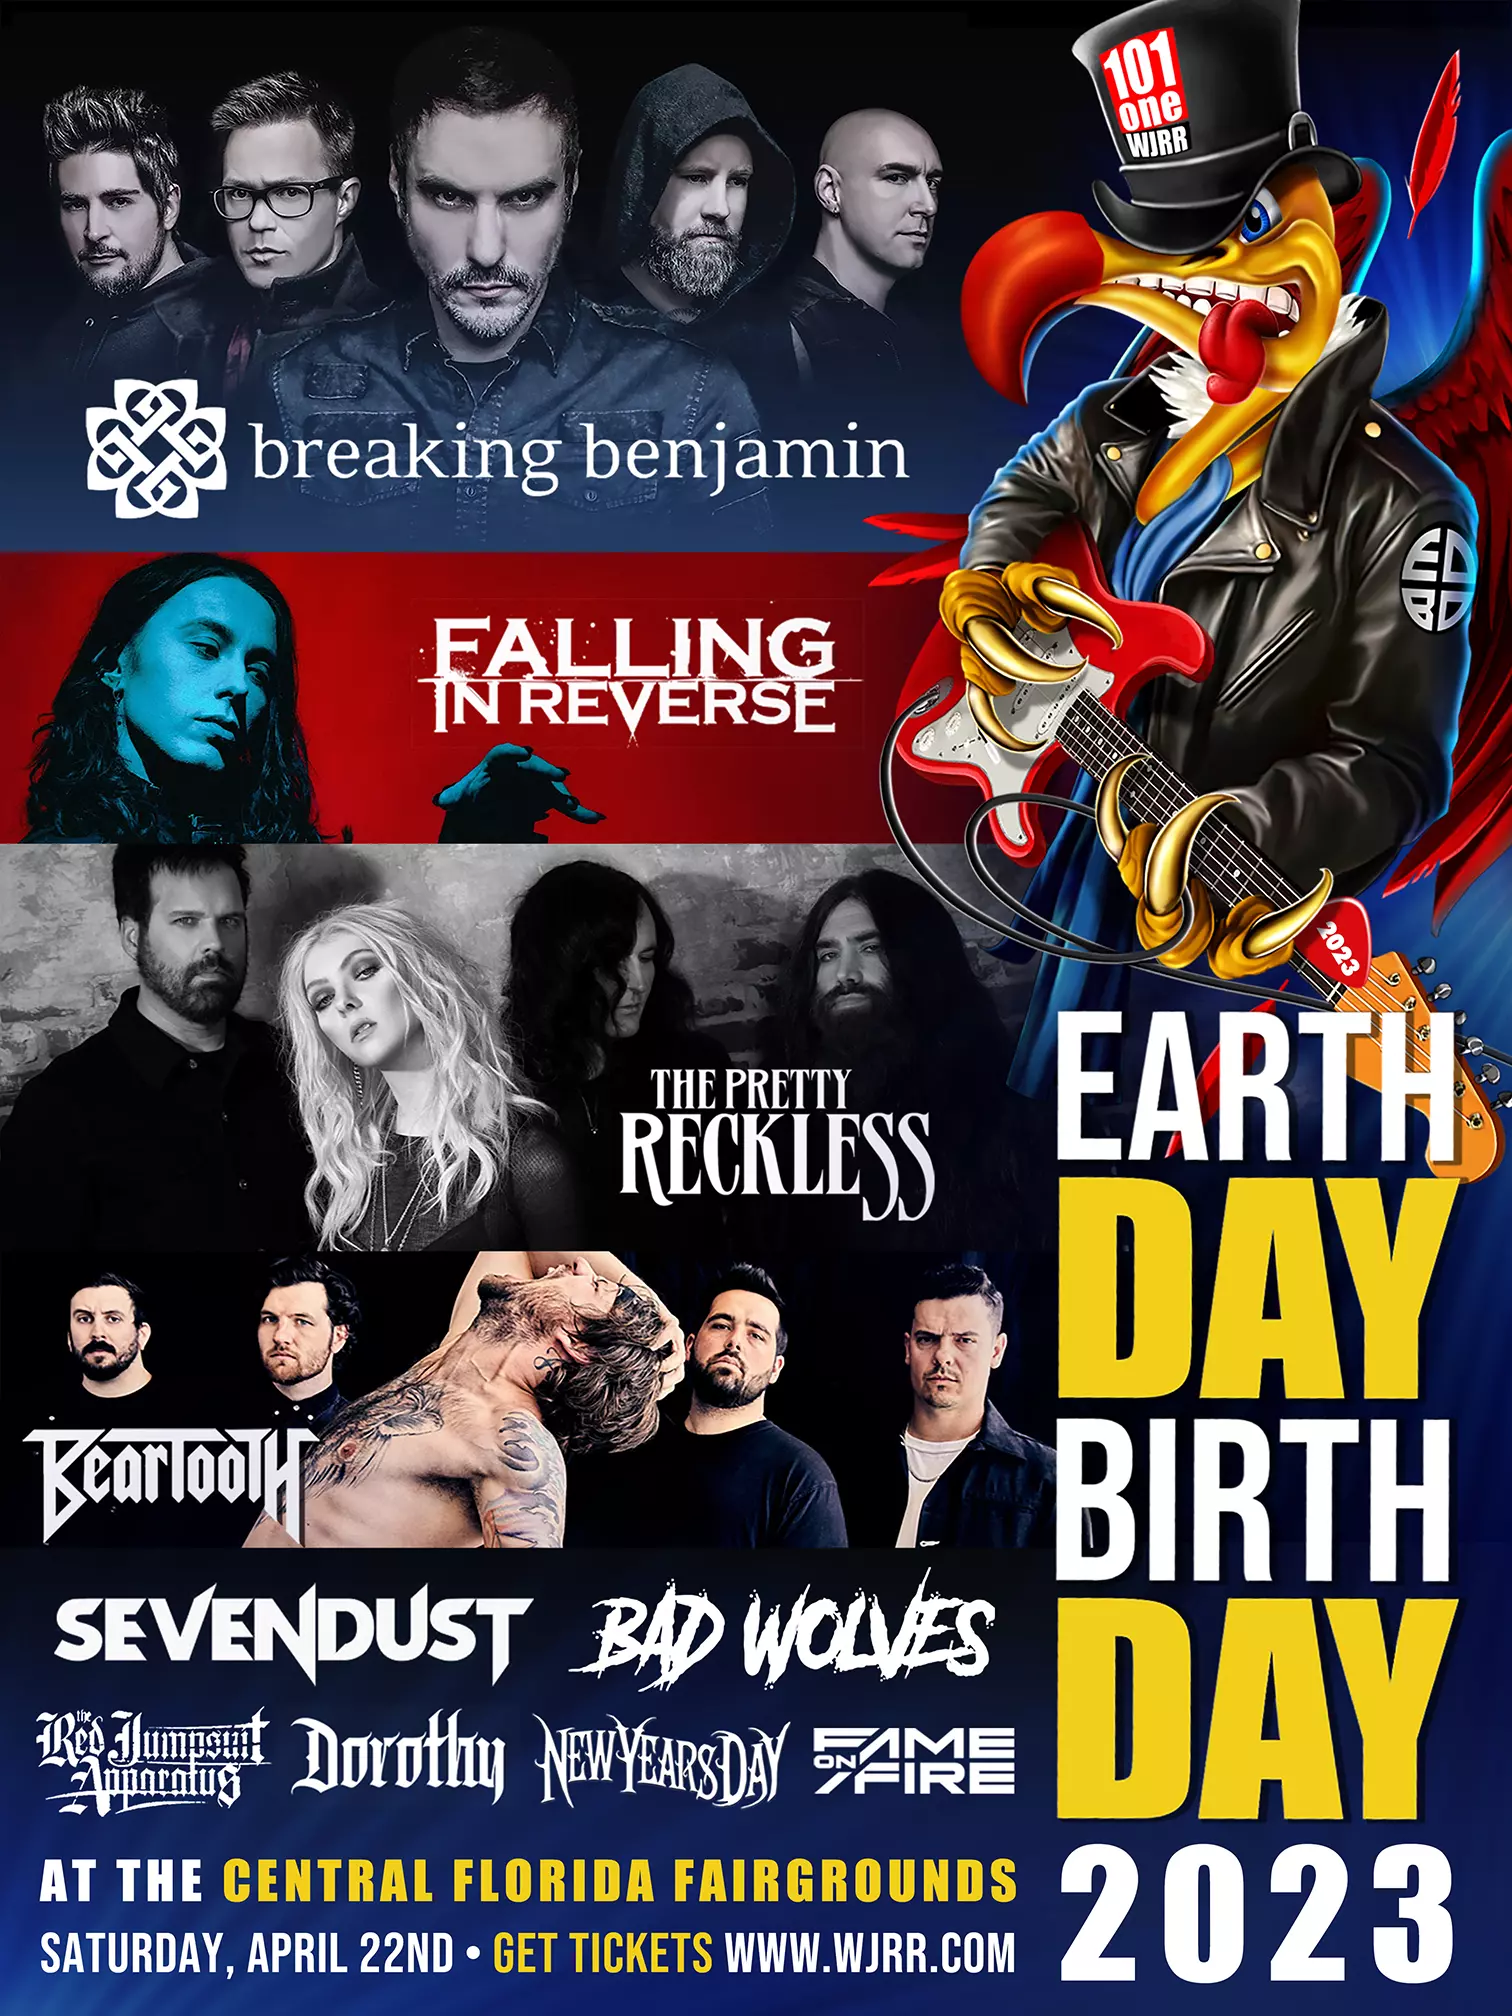 Earthday Birthday 2023 Set Times Announced! SwitchBitch Noise